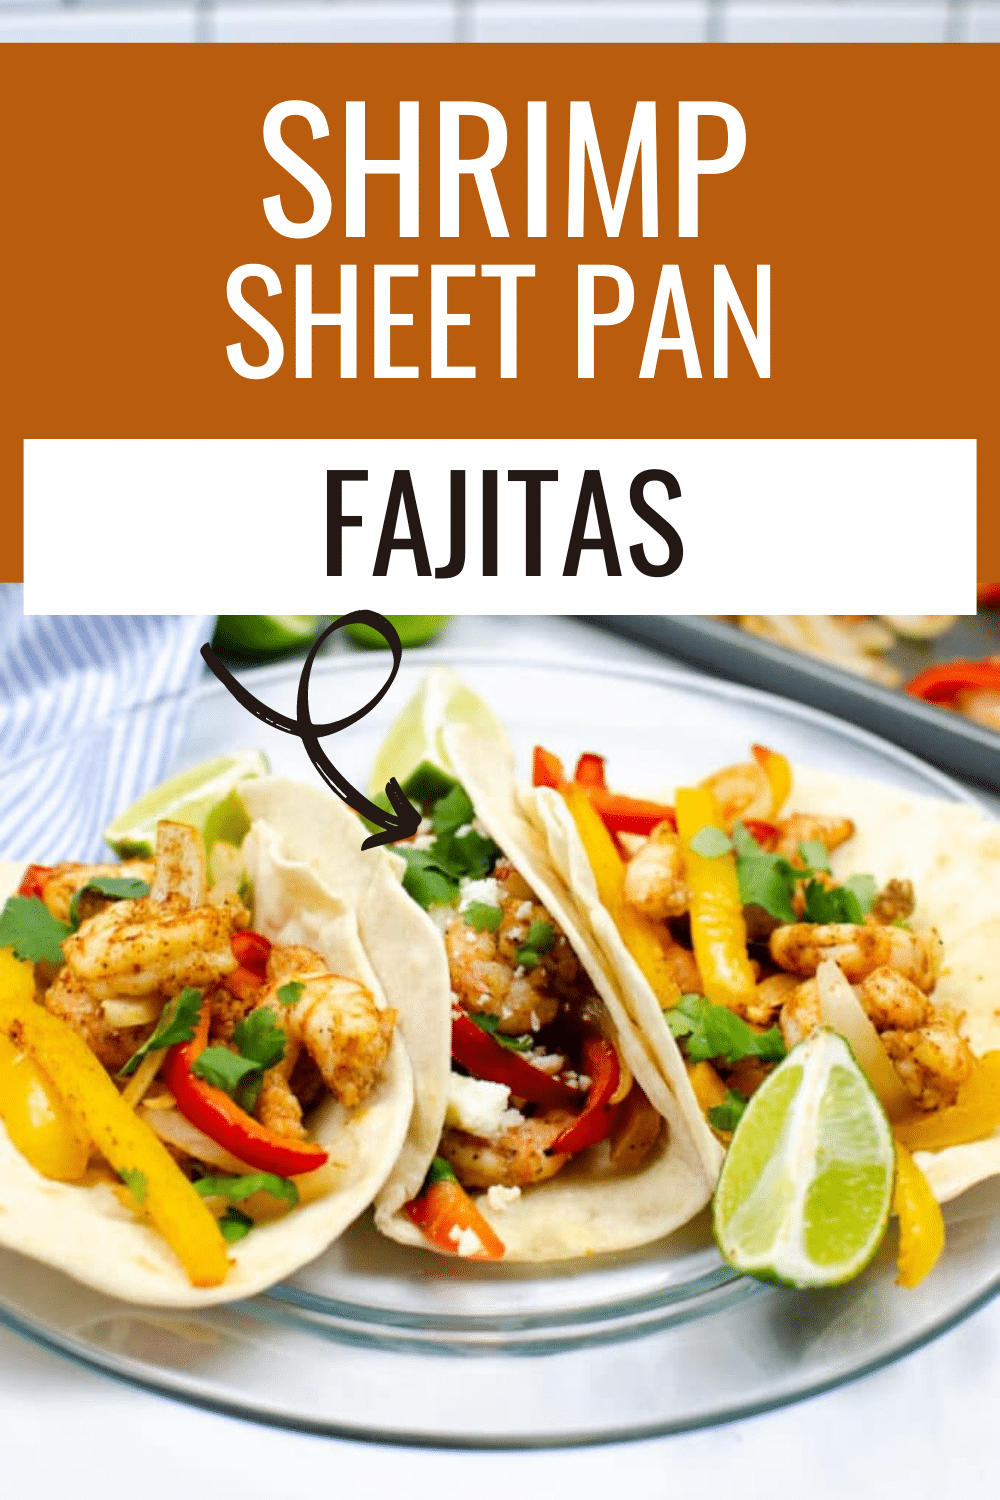 Shrimp Sheet Pan Fajitas Recipe is a fast and simple dinner recipe that is loaded with flavor. Fast, easy, and delicious. #shrimpfajitas #sheetpandinner #recipe #fajitas #dinner via @wondermomwannab